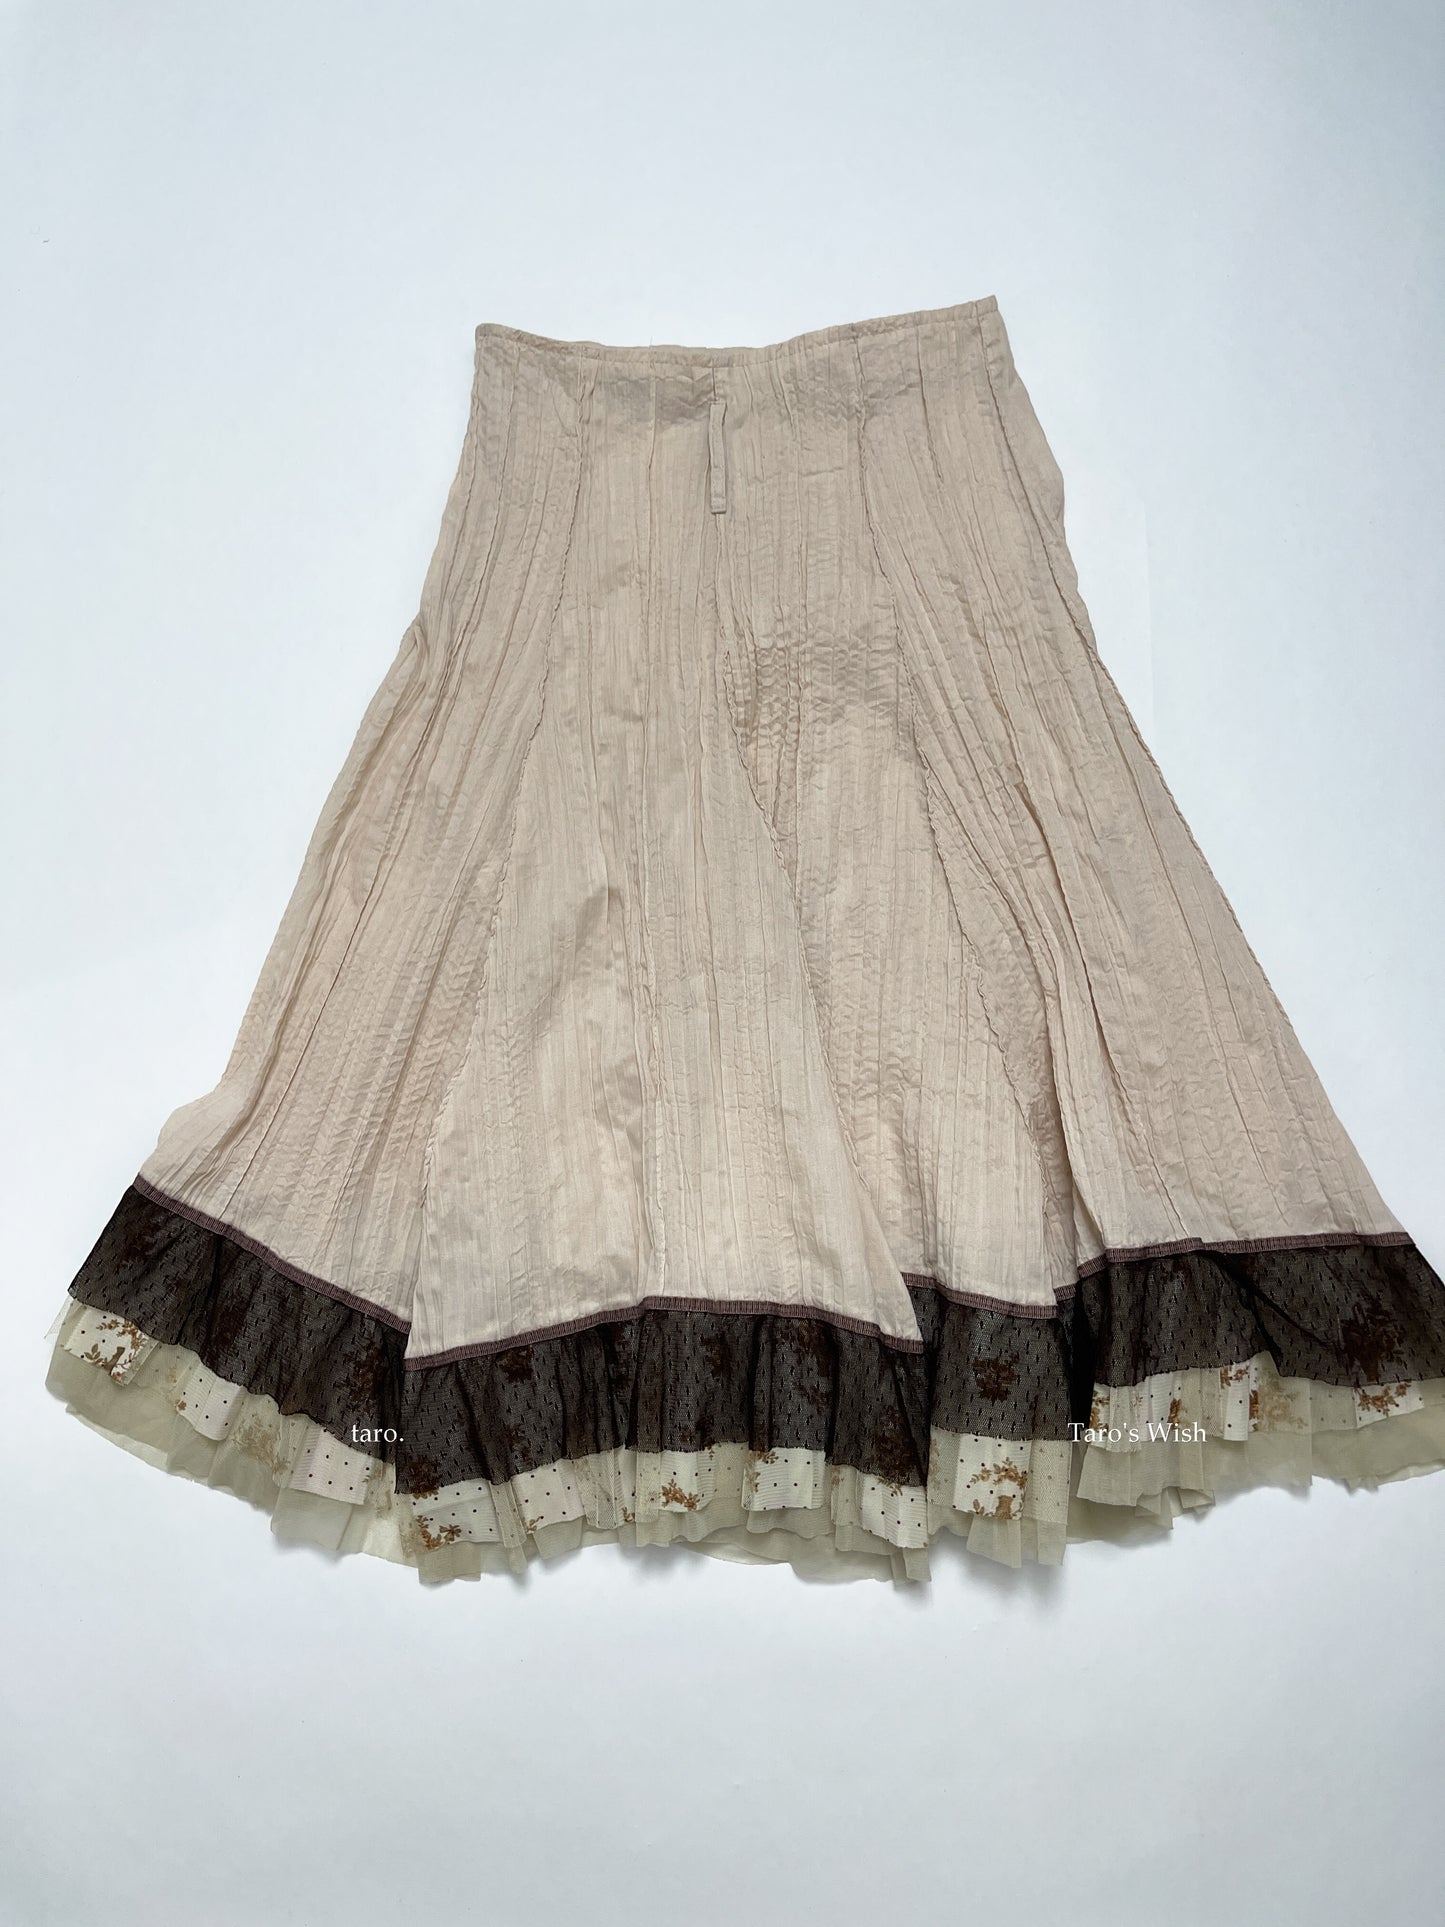 Italian Brand Maxi Skirt in Beige with Brown Floral Layers